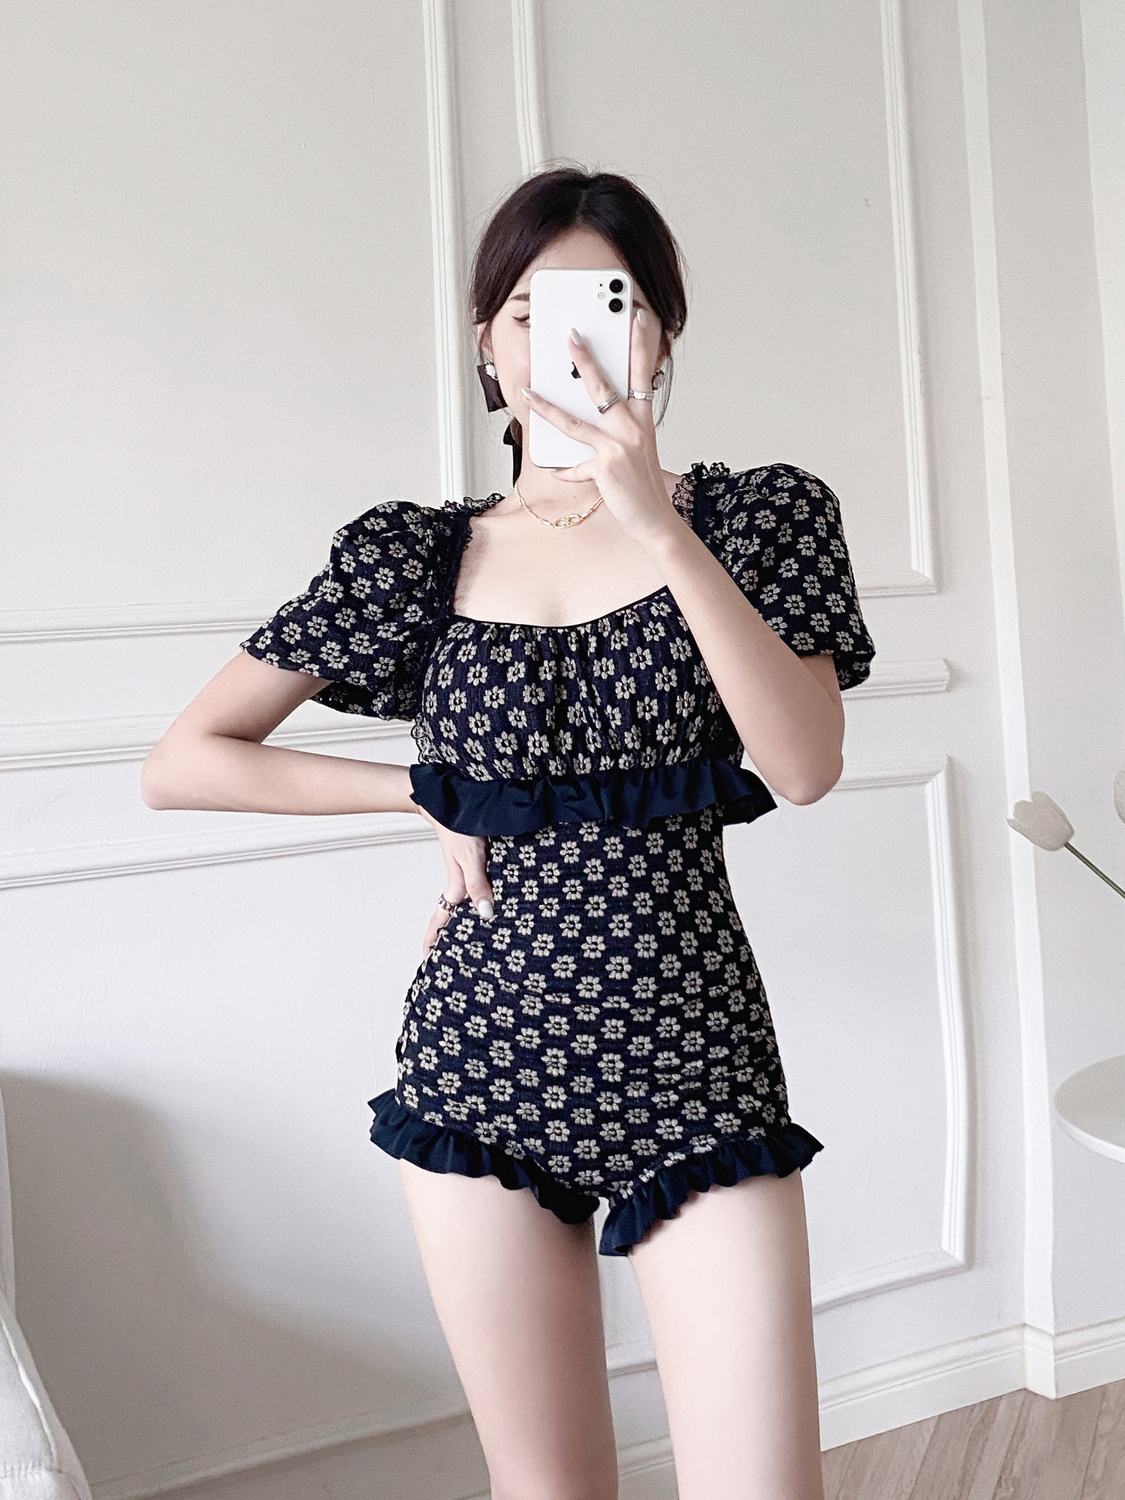  new hot style one-piece swimsuit female hot spring conservative cover belly slimming net red wind lace hot girl pure desire